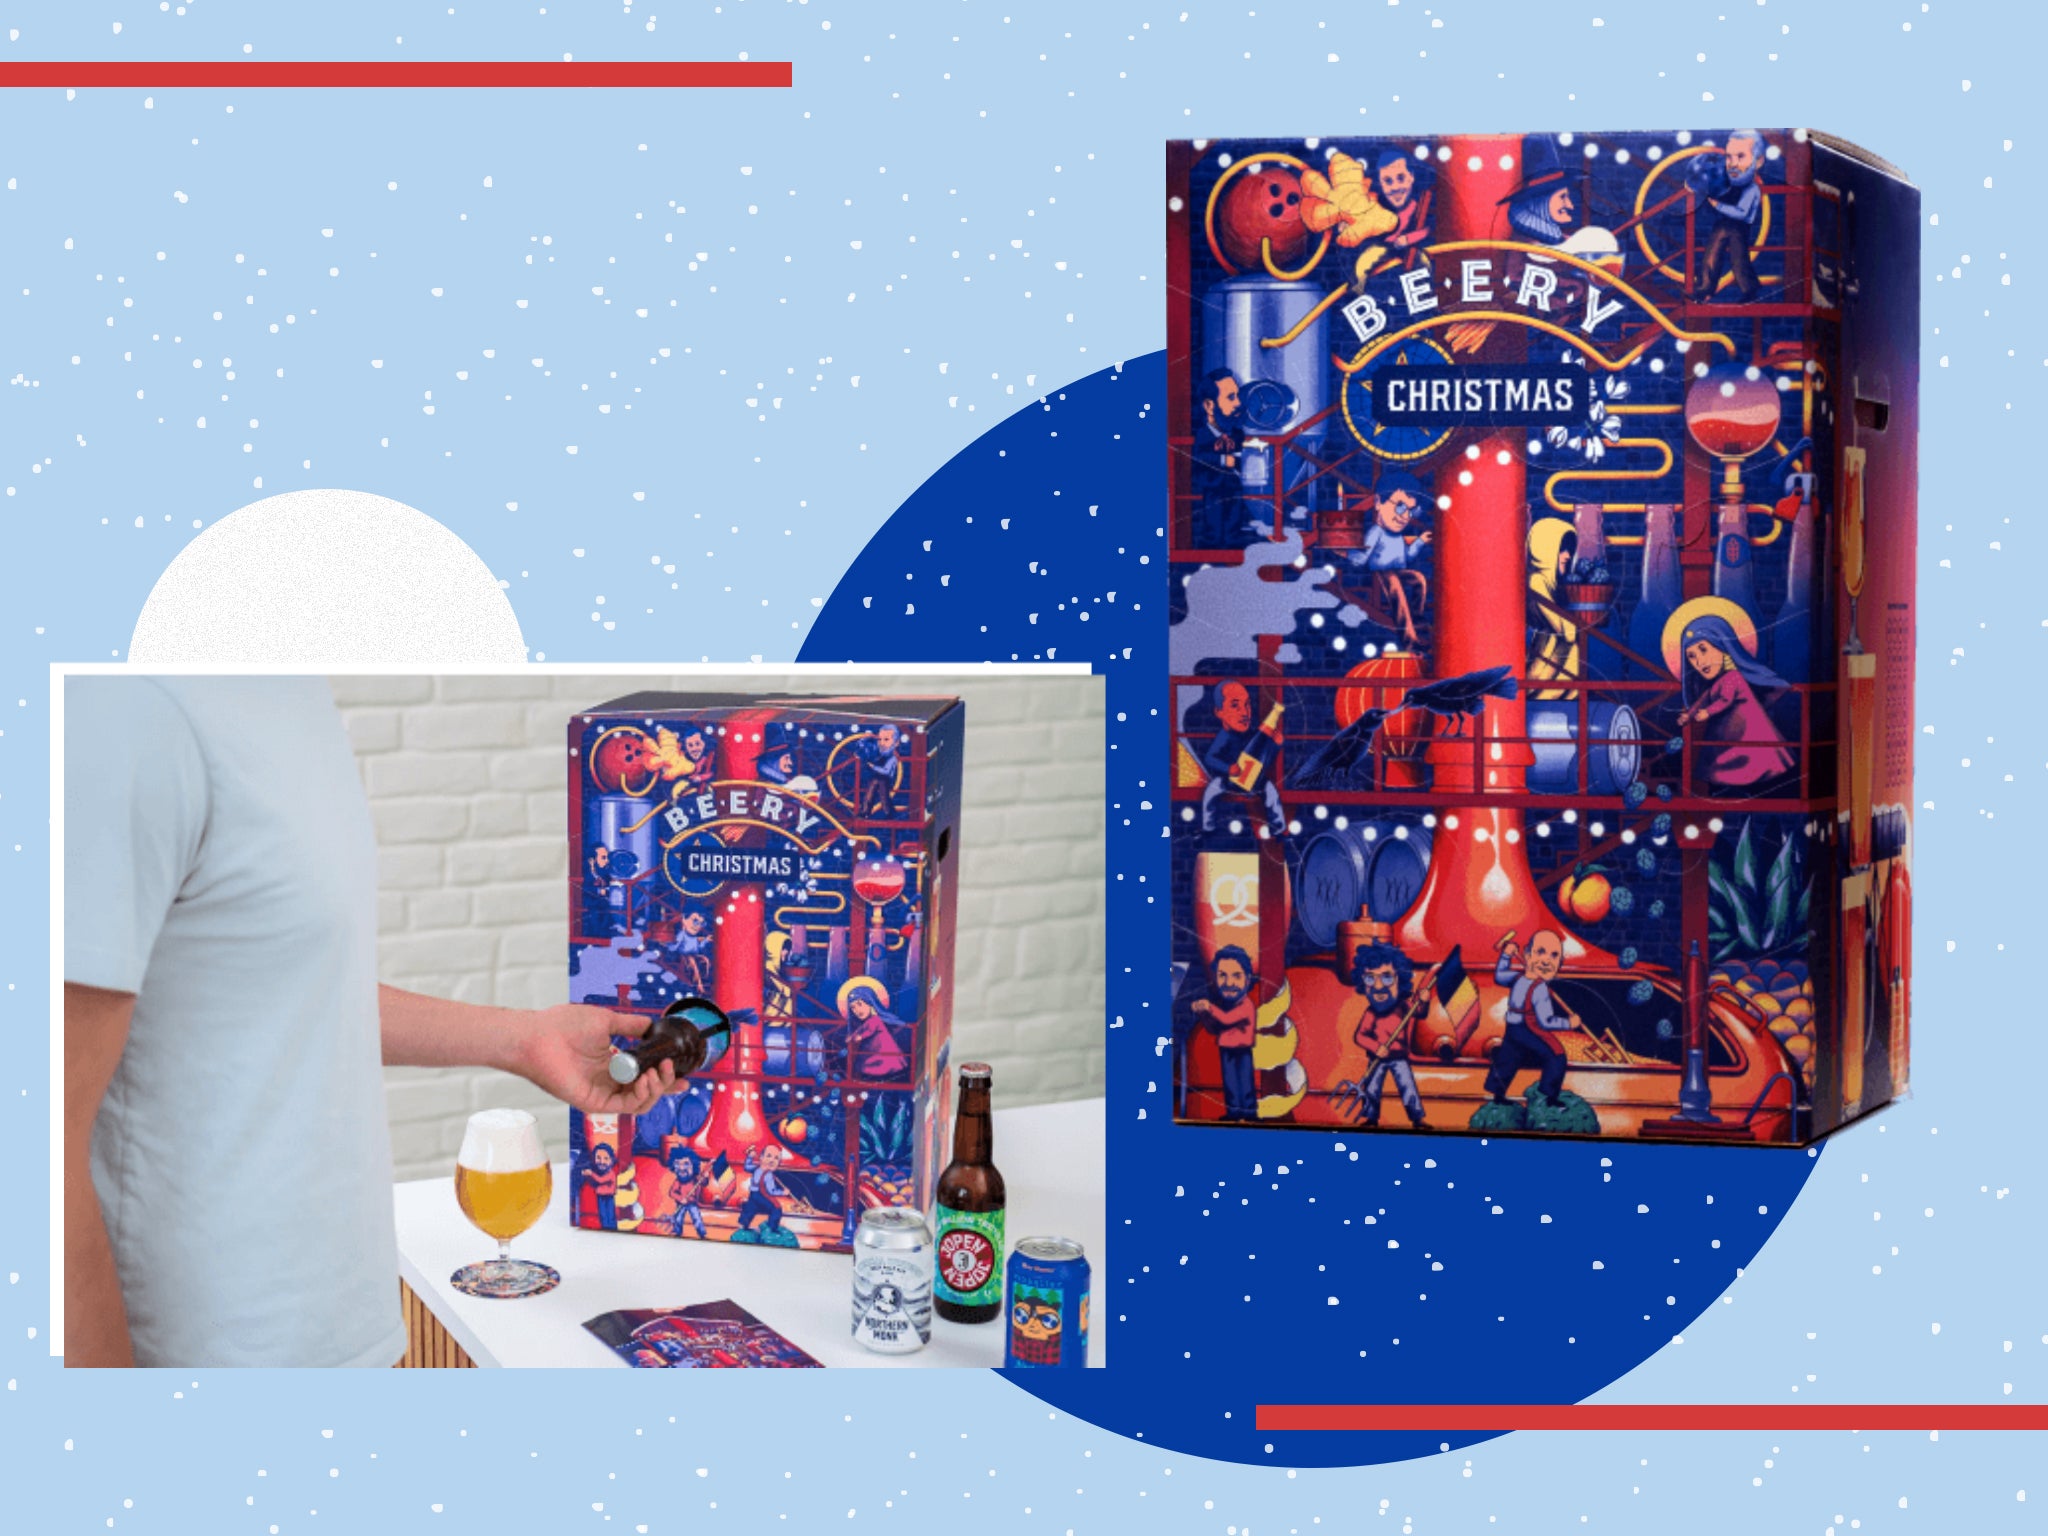 Beer Hawk launches its advent calendar for Christmas 2022 Here’s how